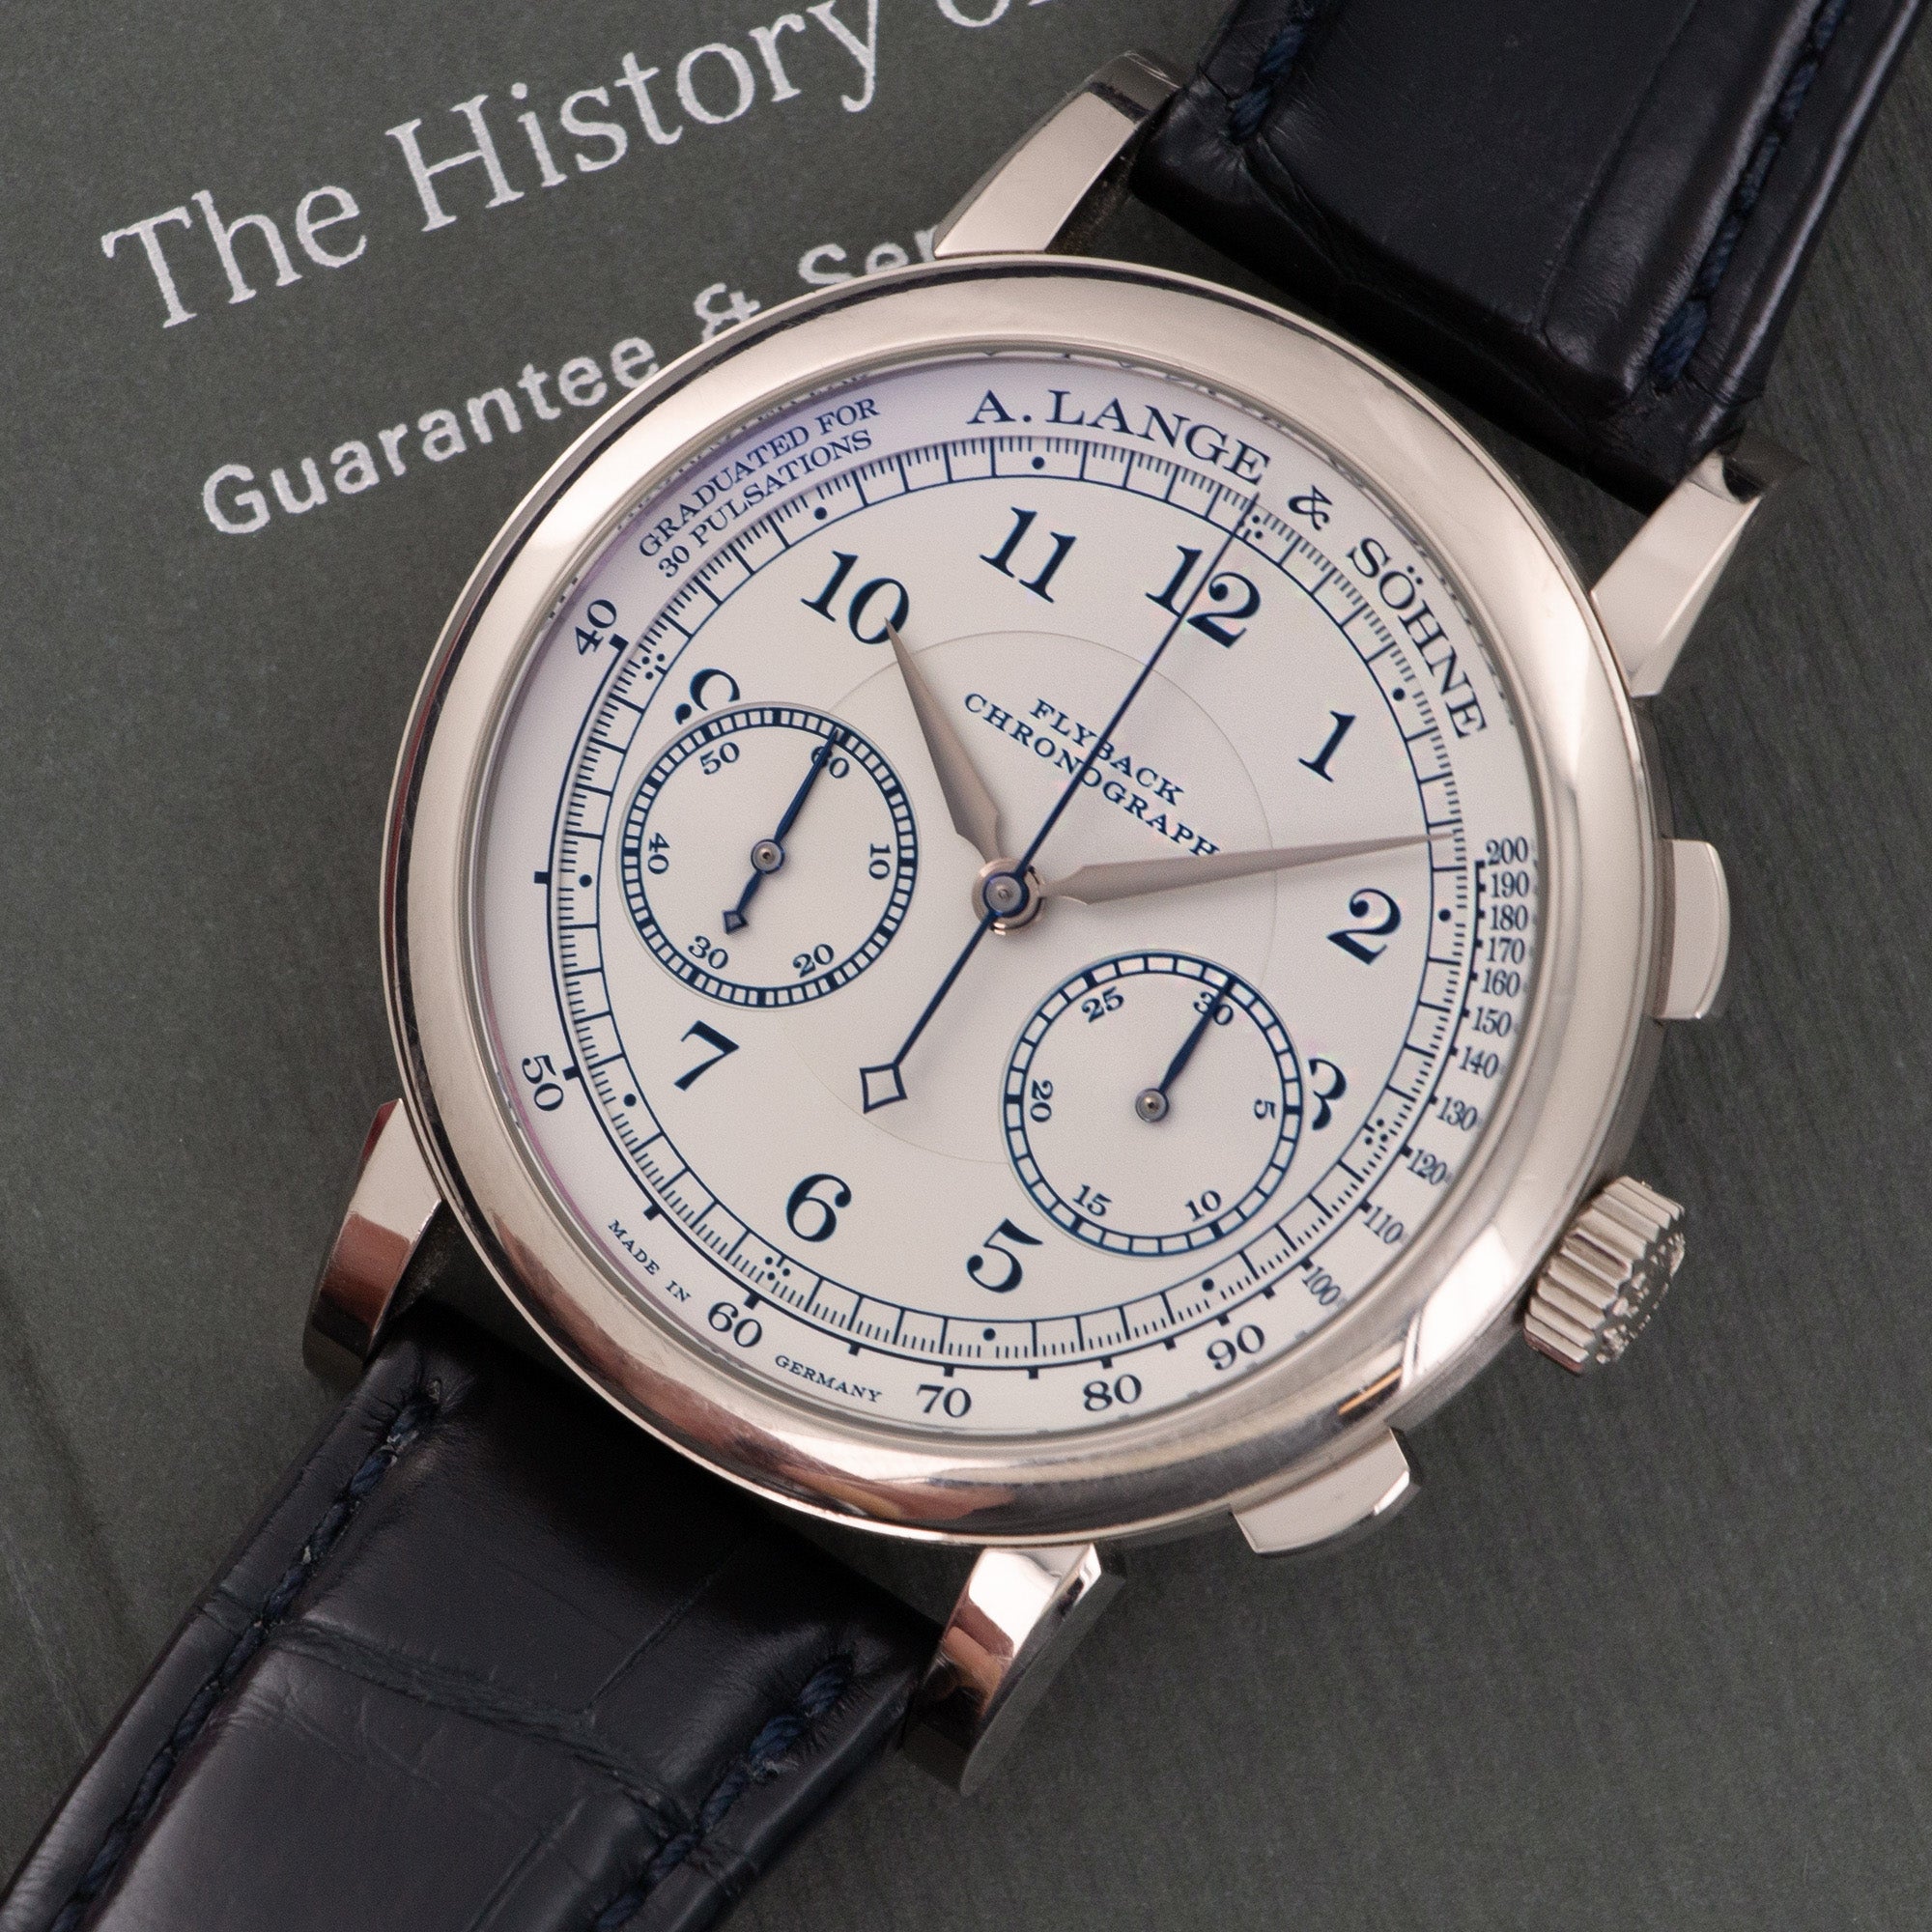 A. Lange & Sohne - A Lange & Sohne White Gold 1815 Chronograph Watch - The Keystone Watches